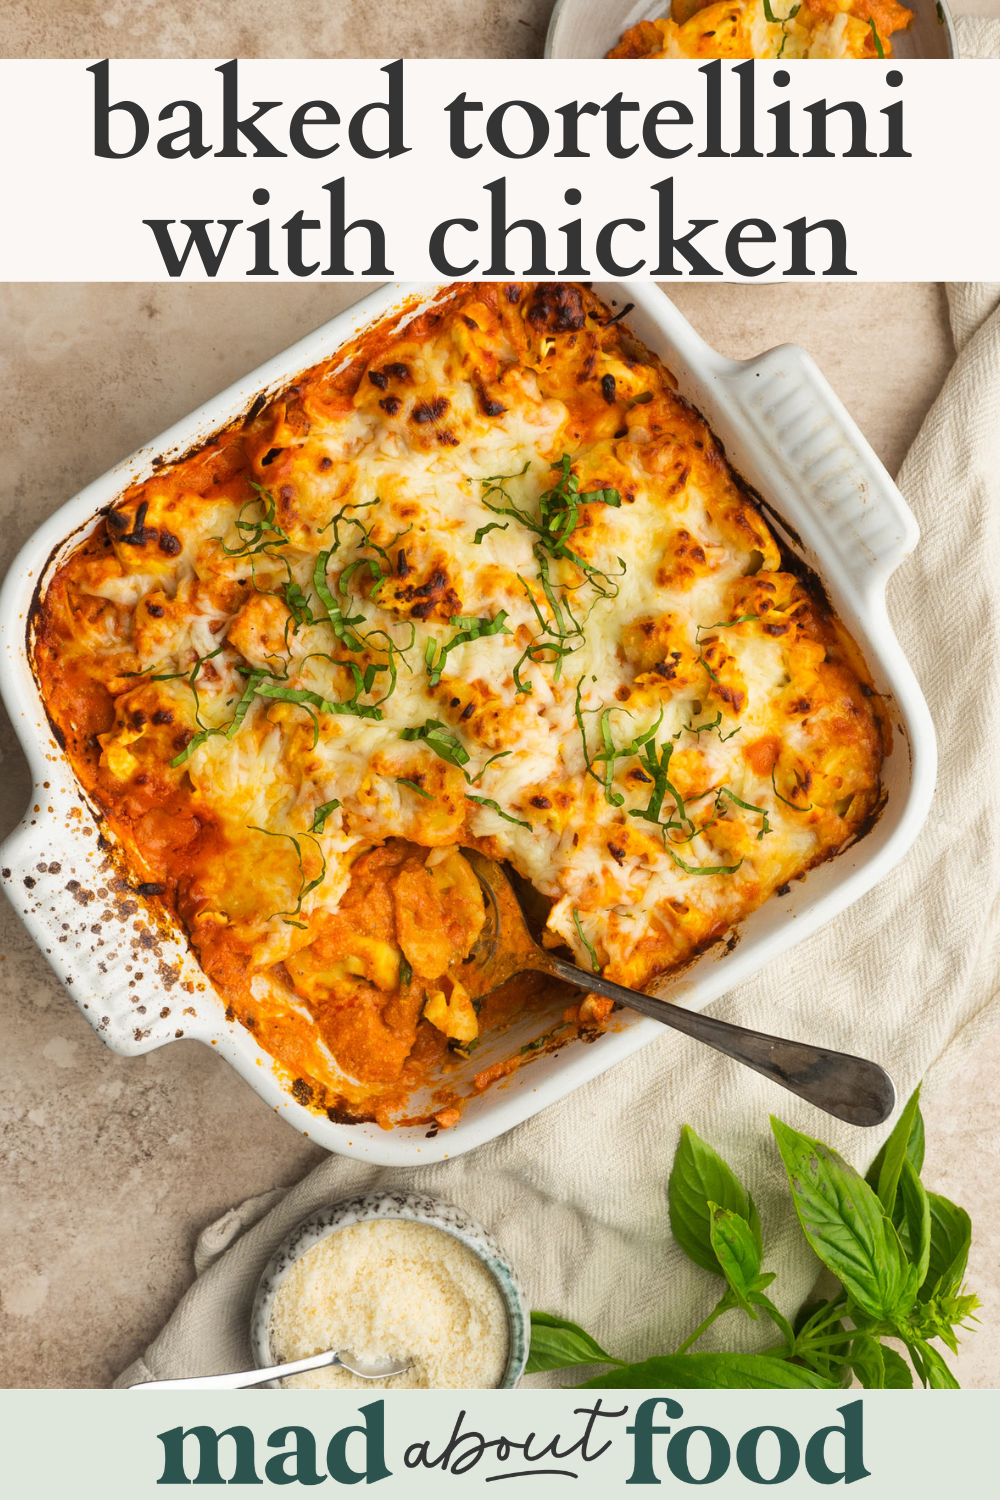 Image for pinning baked tortellini with chicken recipe on pinterest